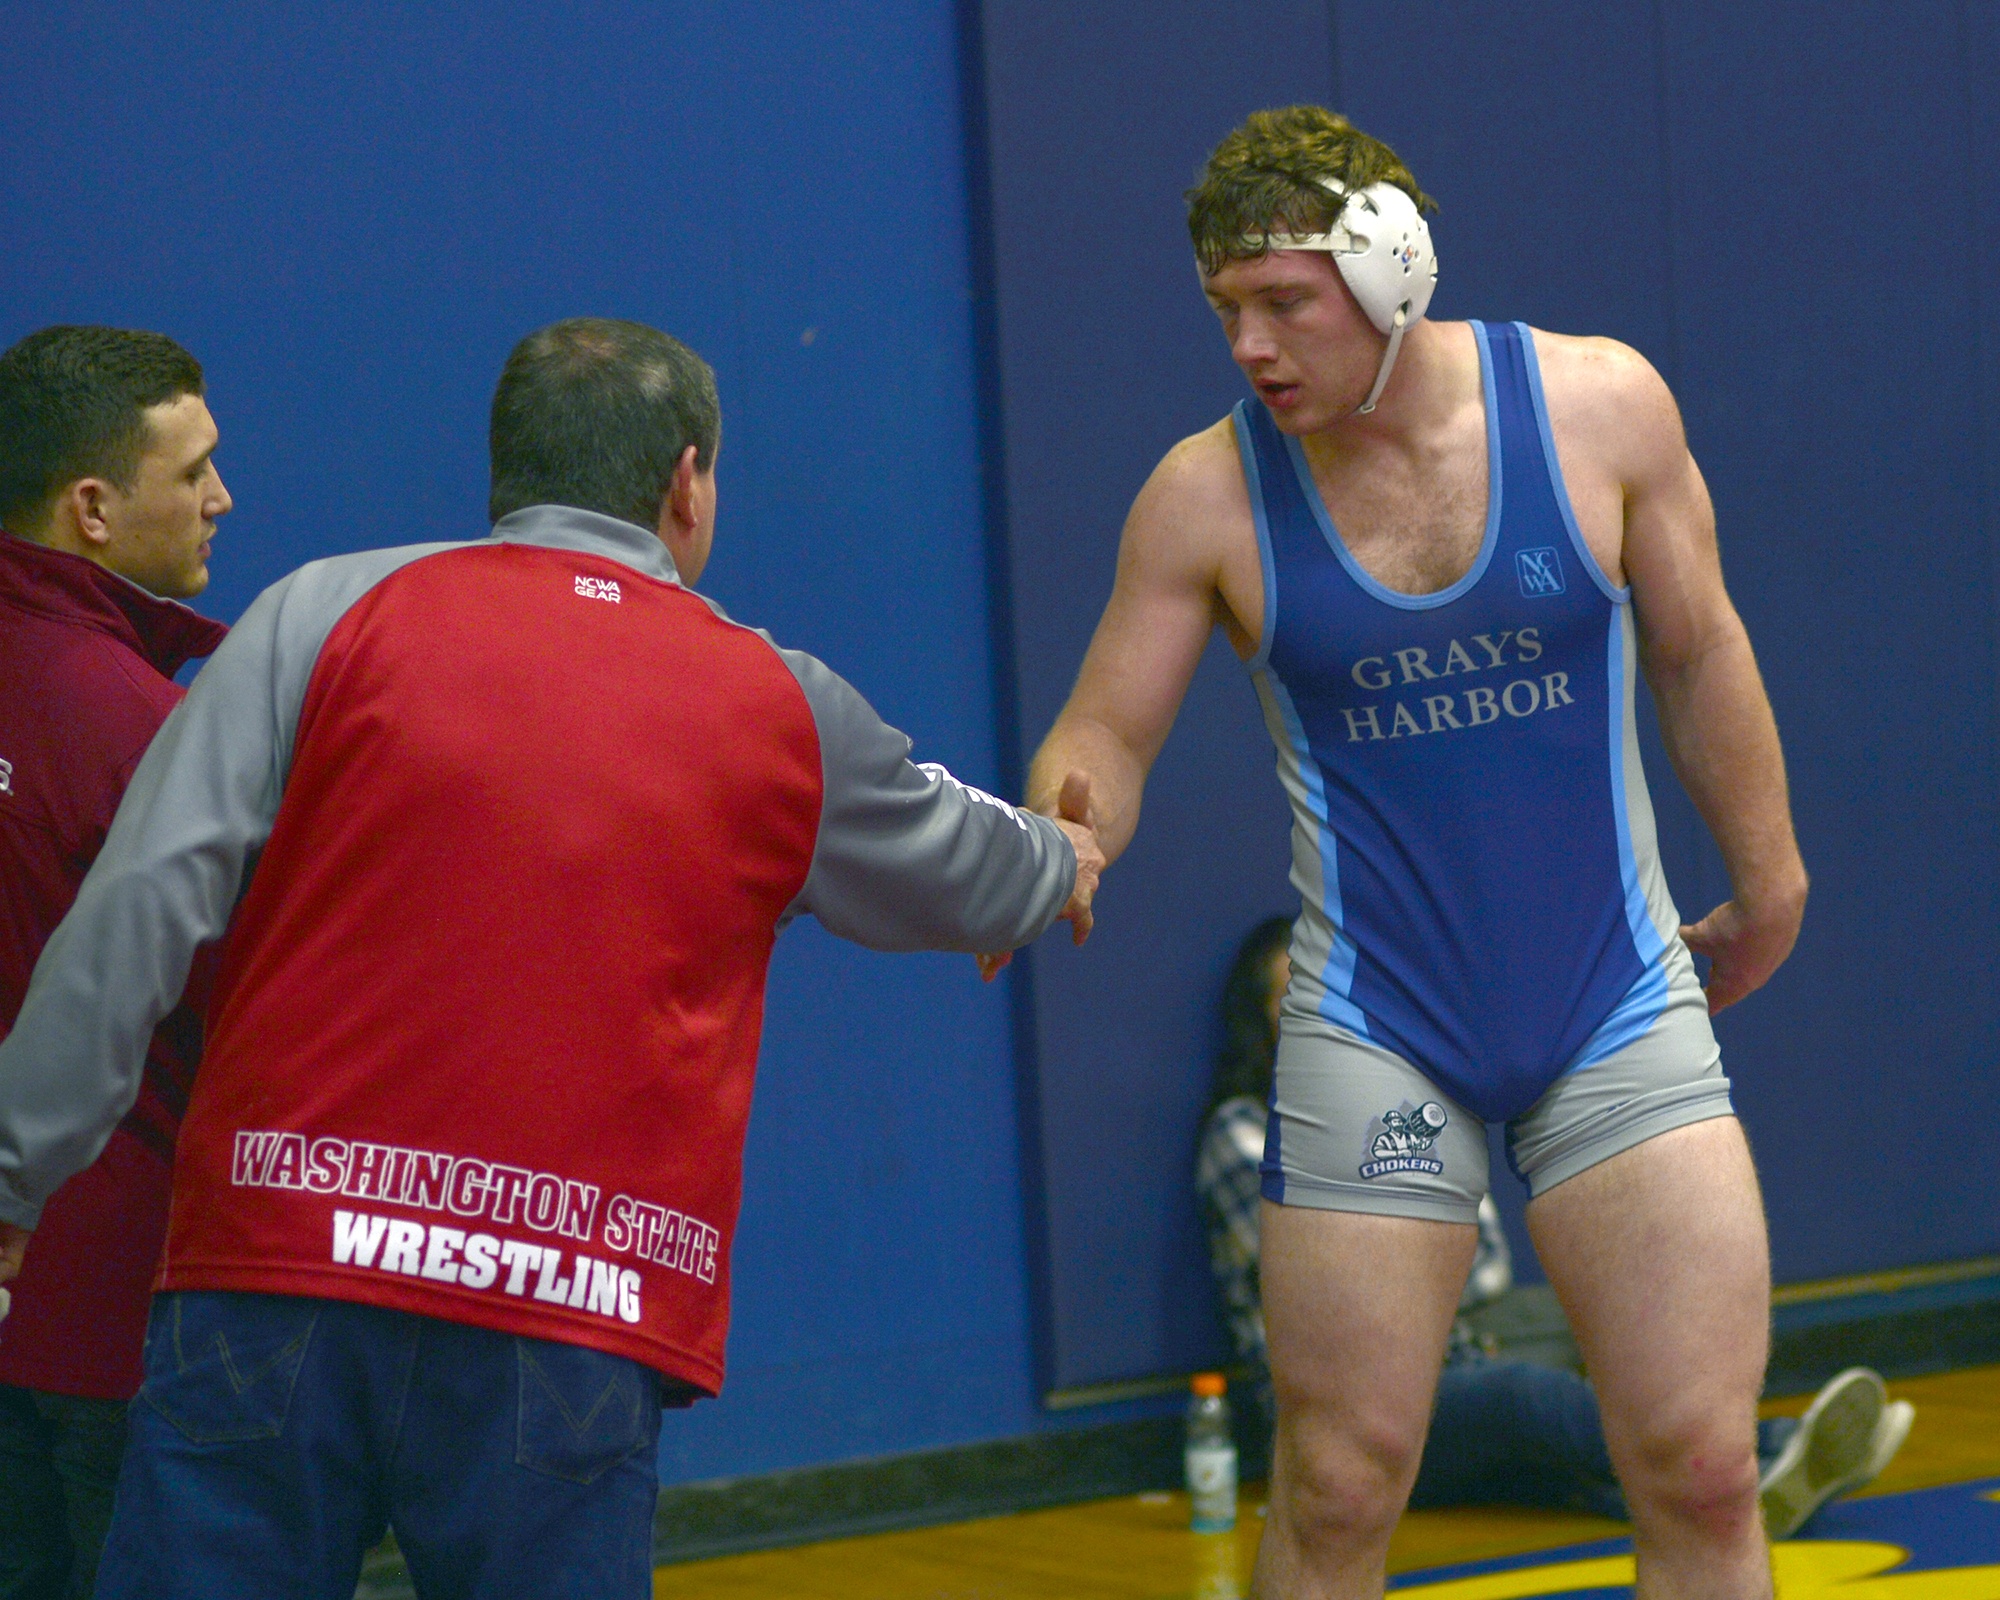 Grays Harbor College wins back-to-back NCWA Northwest Conference titles